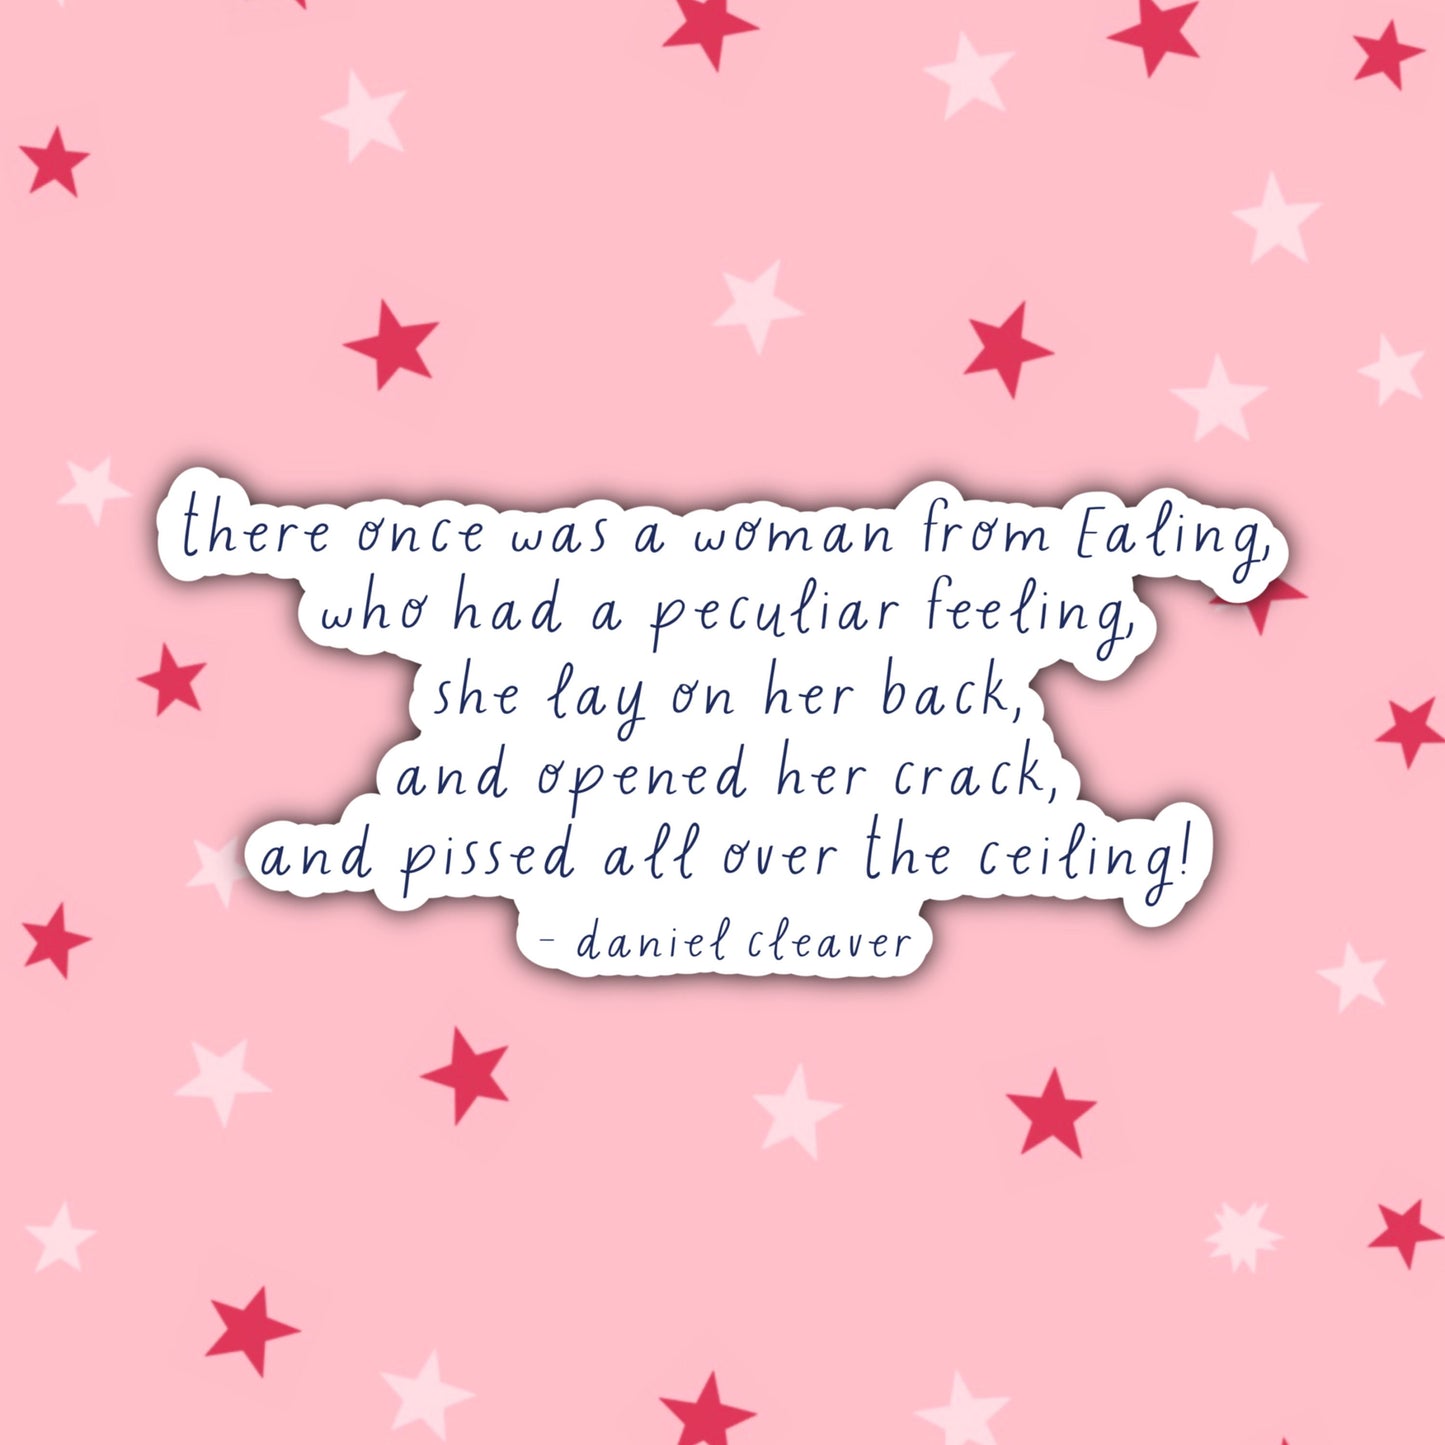 Daniel Cleaver's Poem | There Once Was a Woman from Ealing | Bridget Jones Stickers